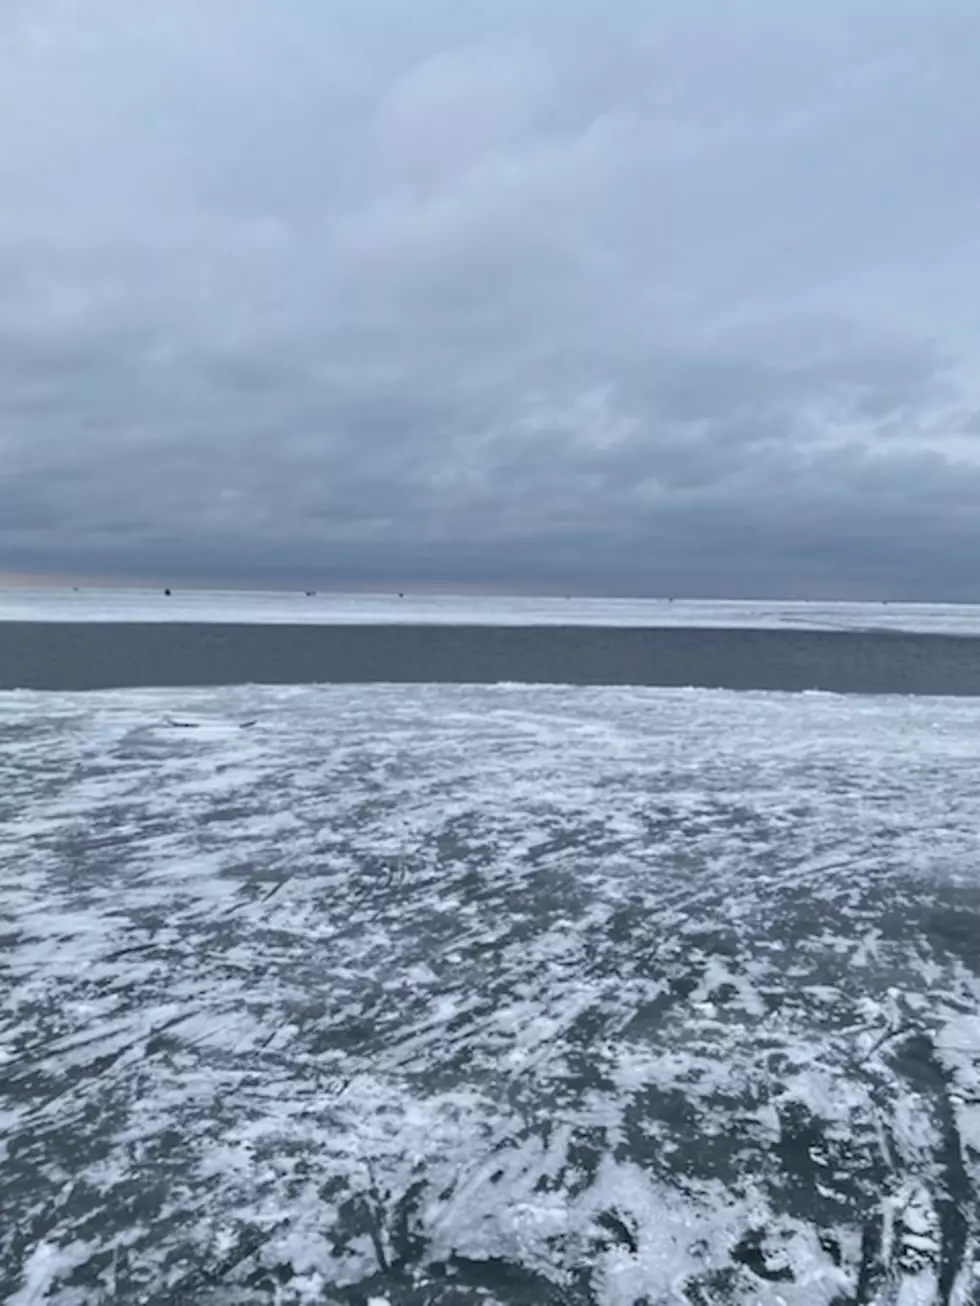 200 Minnesota Anglers Saved From Floating Away On Sheet Of Ice